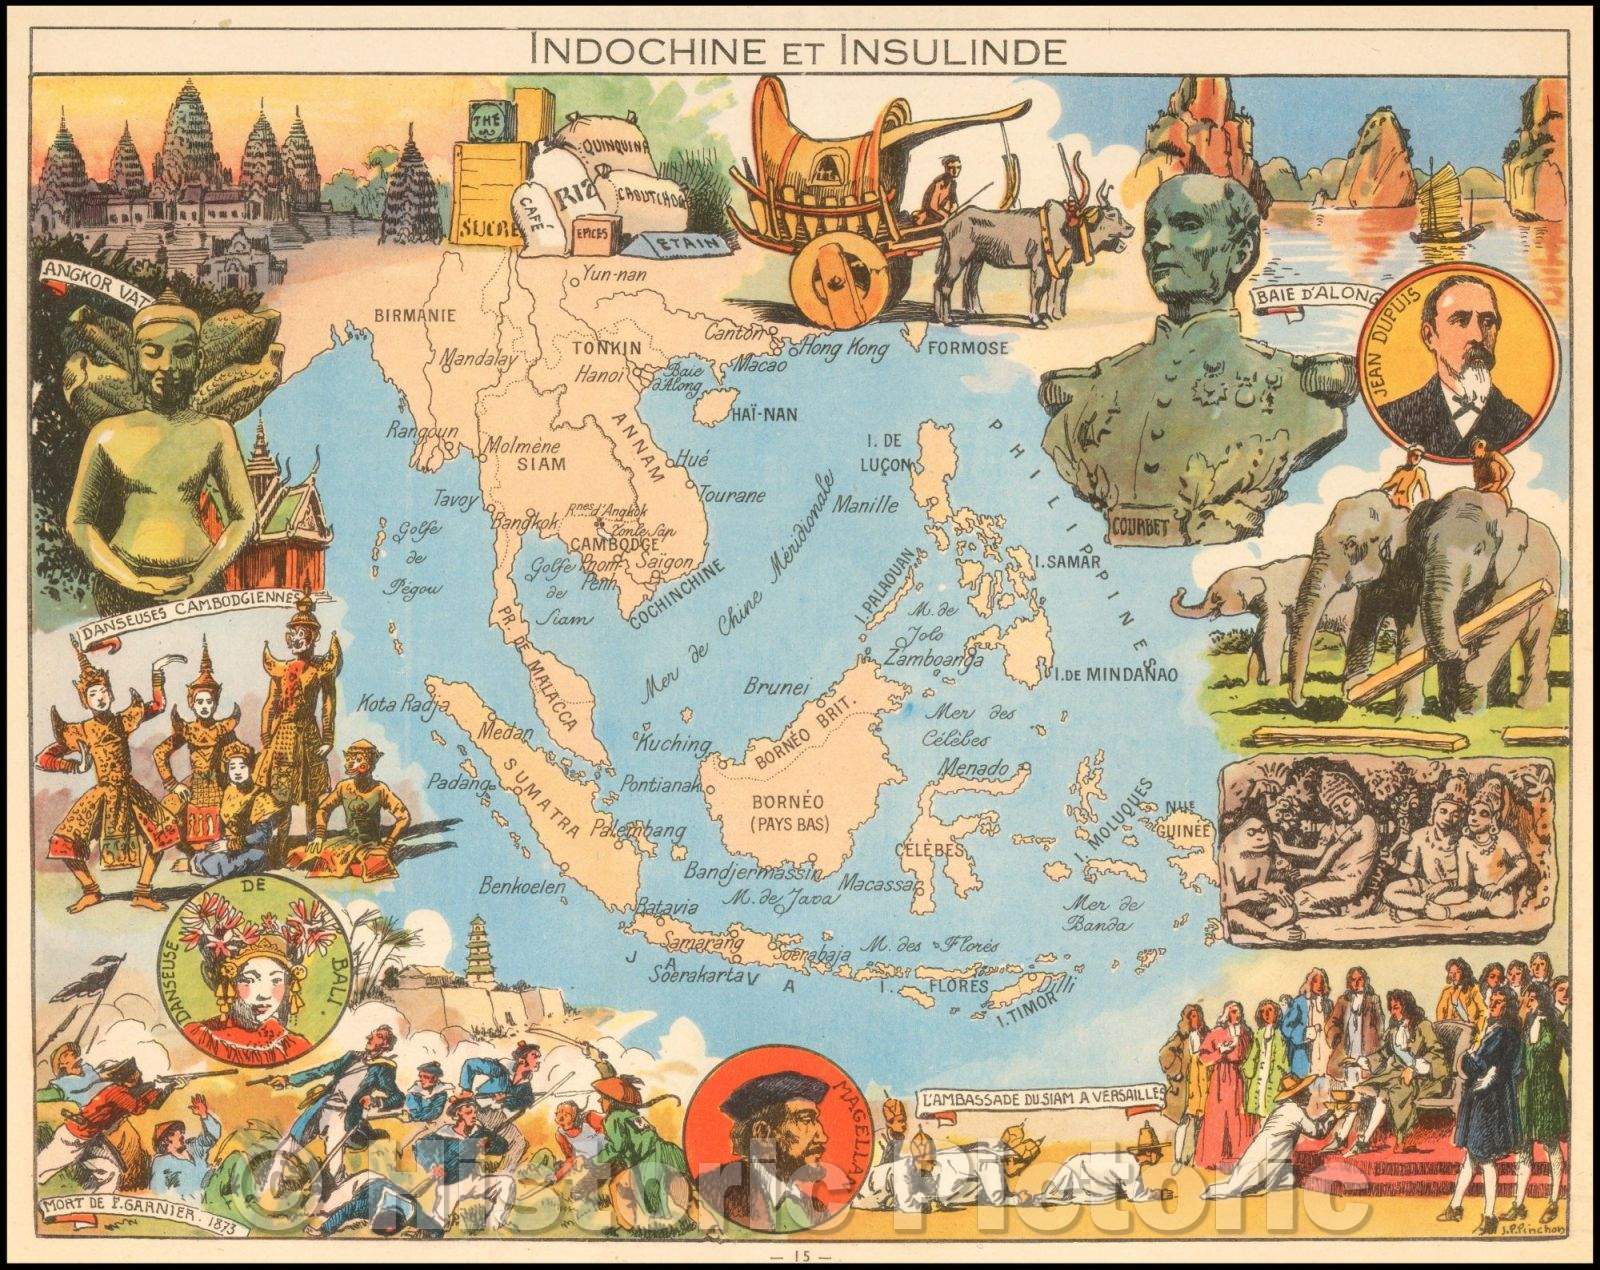 Historic Map - Indochine et Insulinde/Pictorial Map of Southeast Asia and the Philippines, 1950, Joseph Porphyre Pinchon - Vintage Wall Art